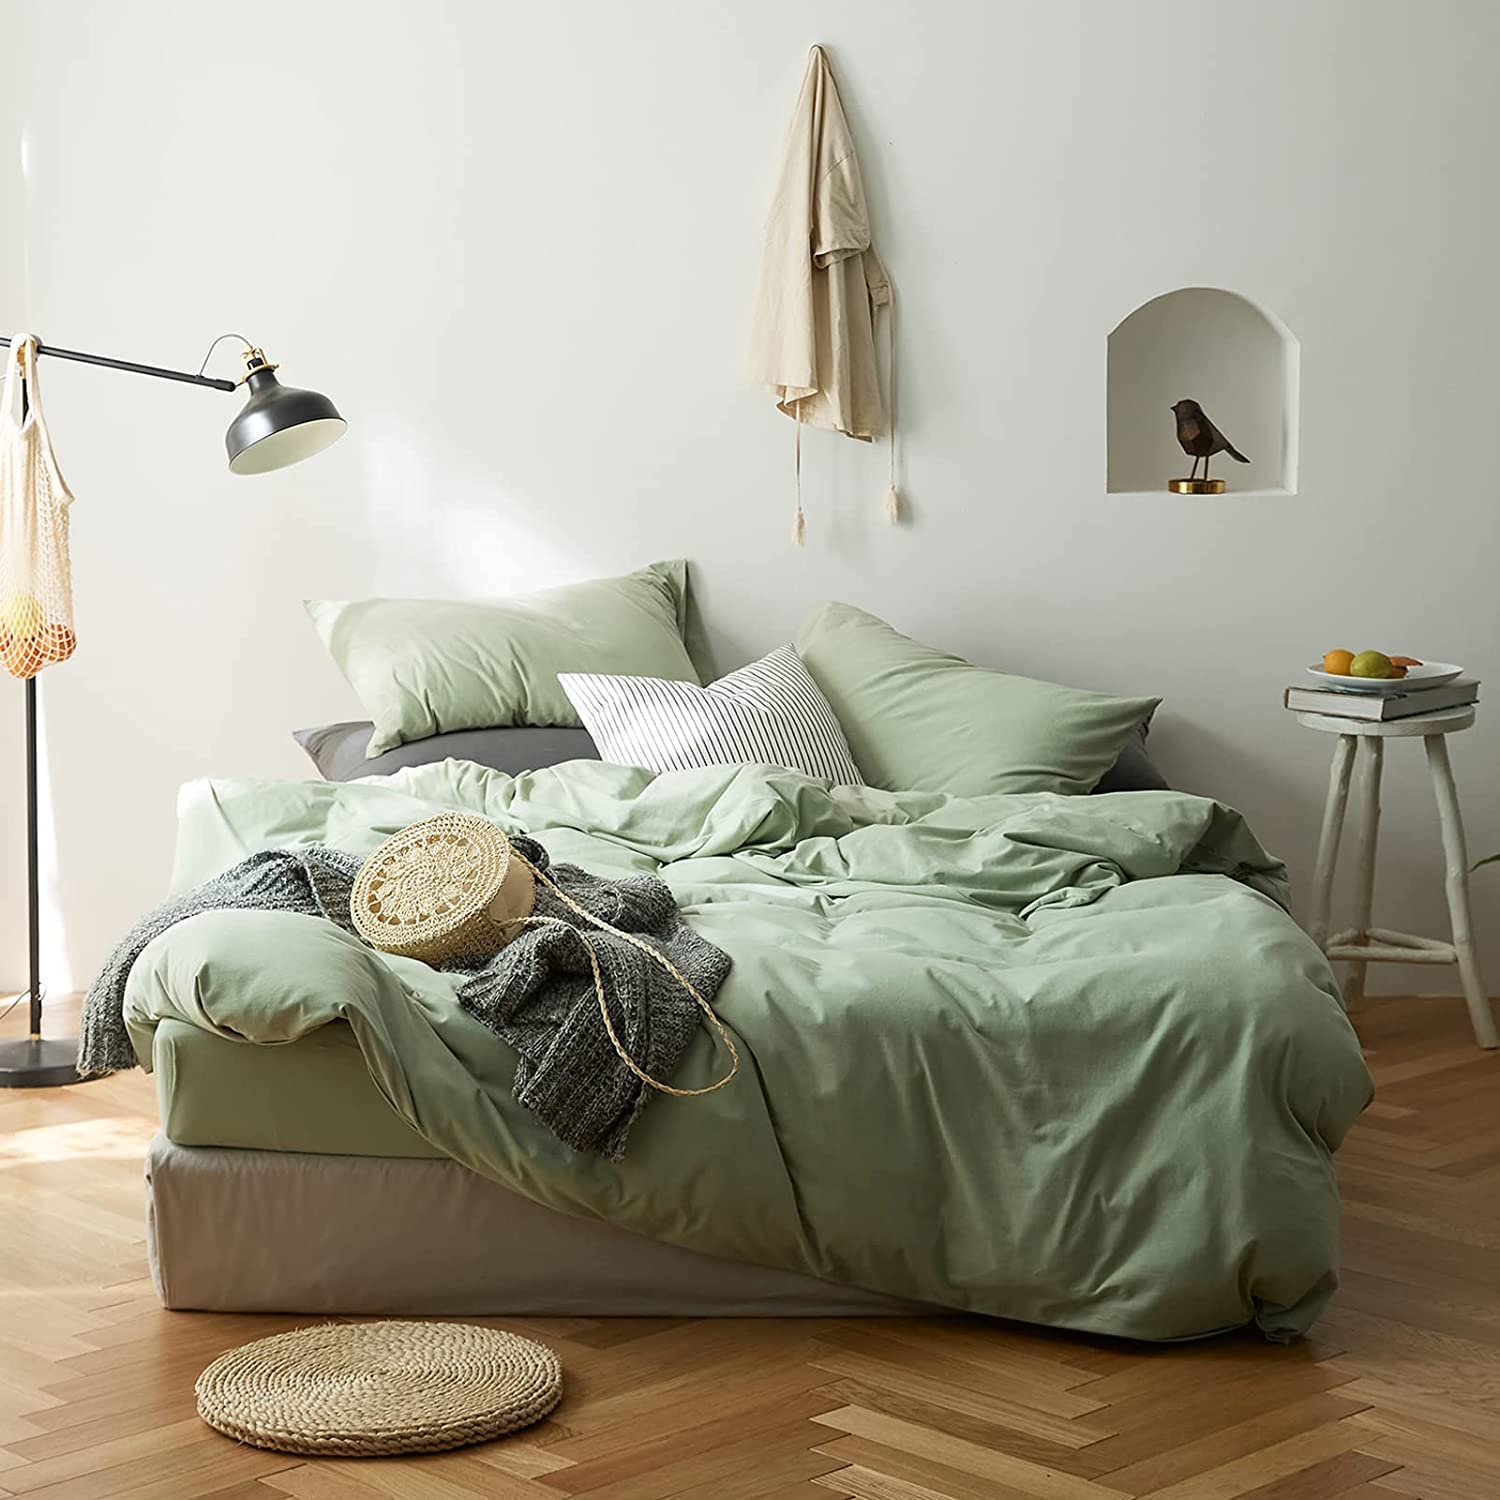 Eco-Friendly Luxury Bedding Options: Comfort without Compromise